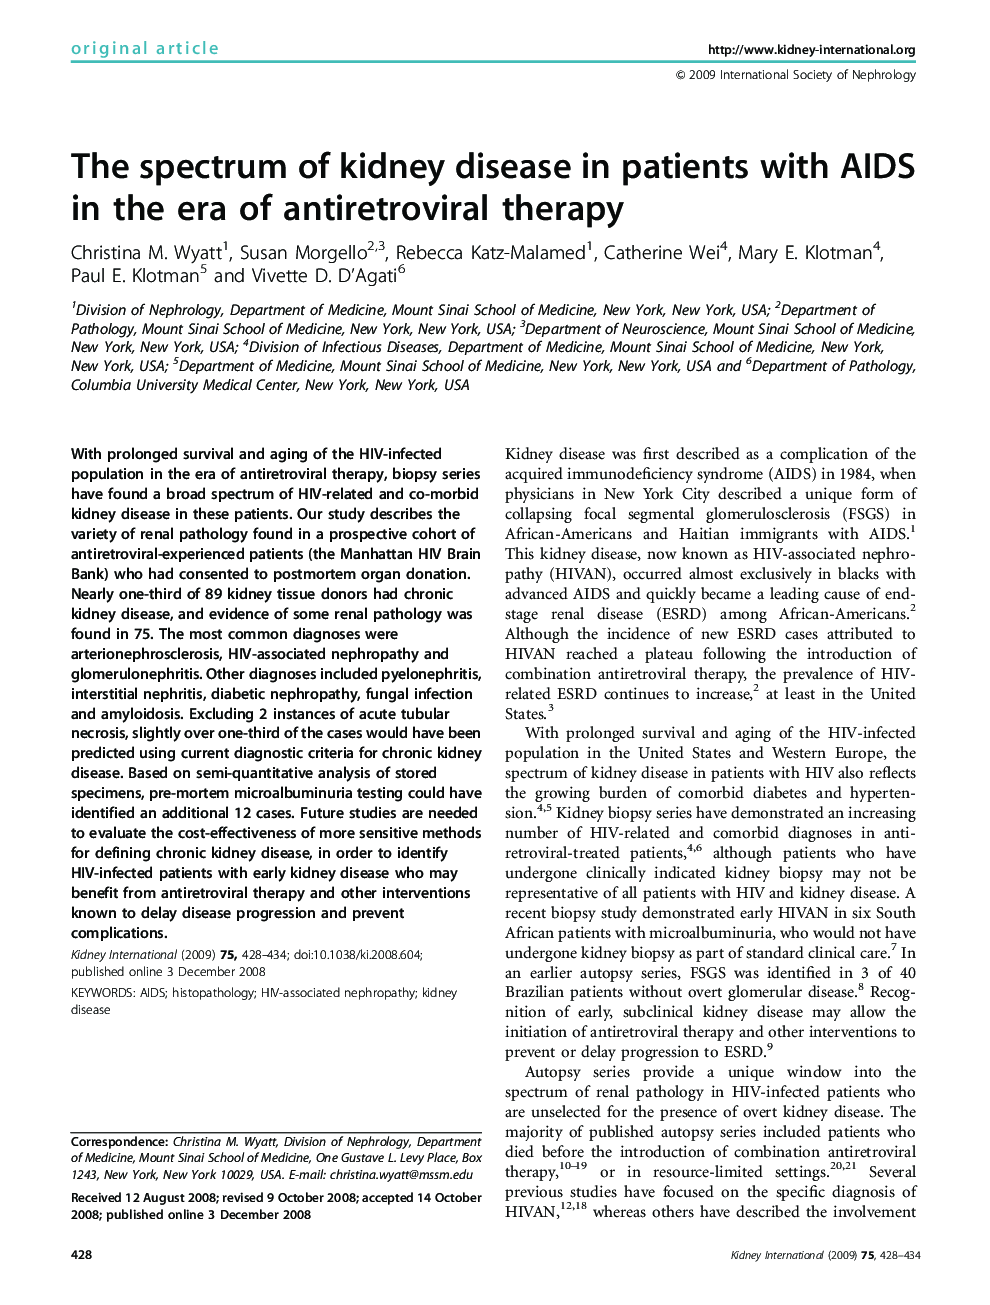 The spectrum of kidney disease in patients with AIDS in the era of antiretroviral therapy